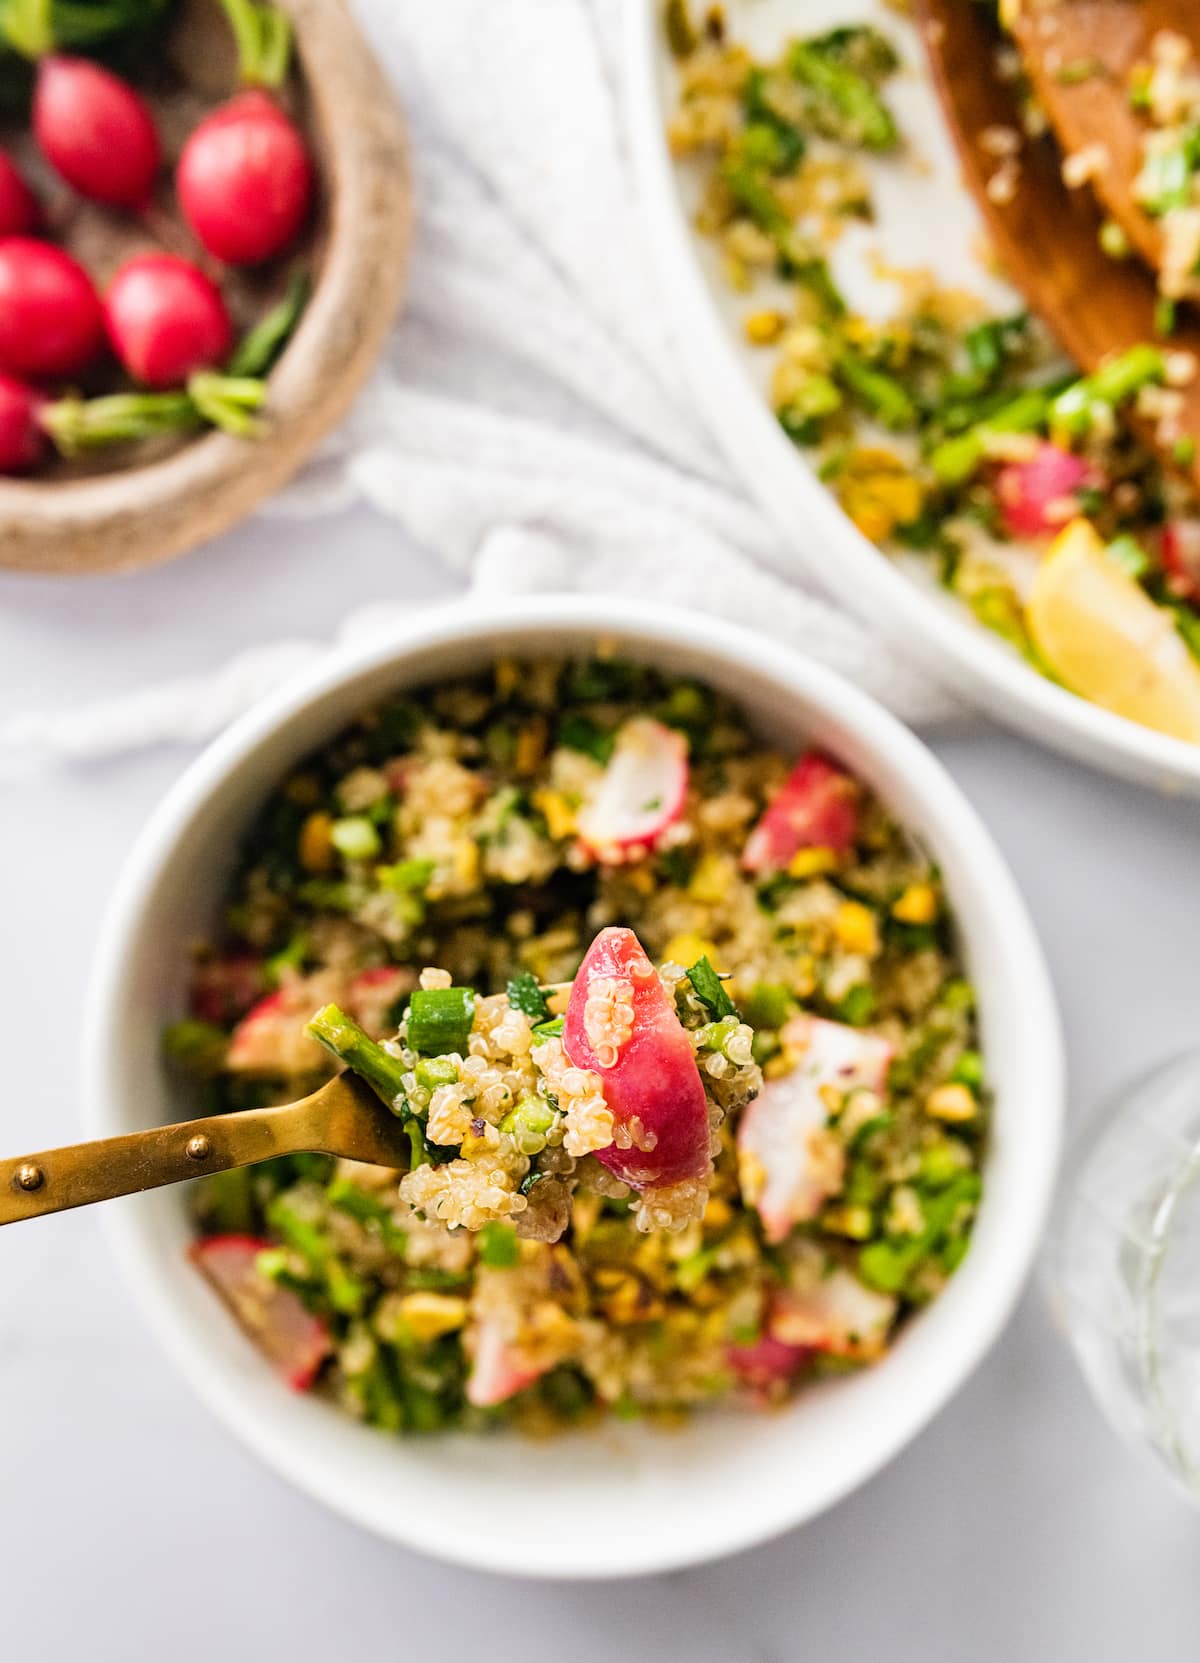 A bite of spring quinoa salad on a fork.